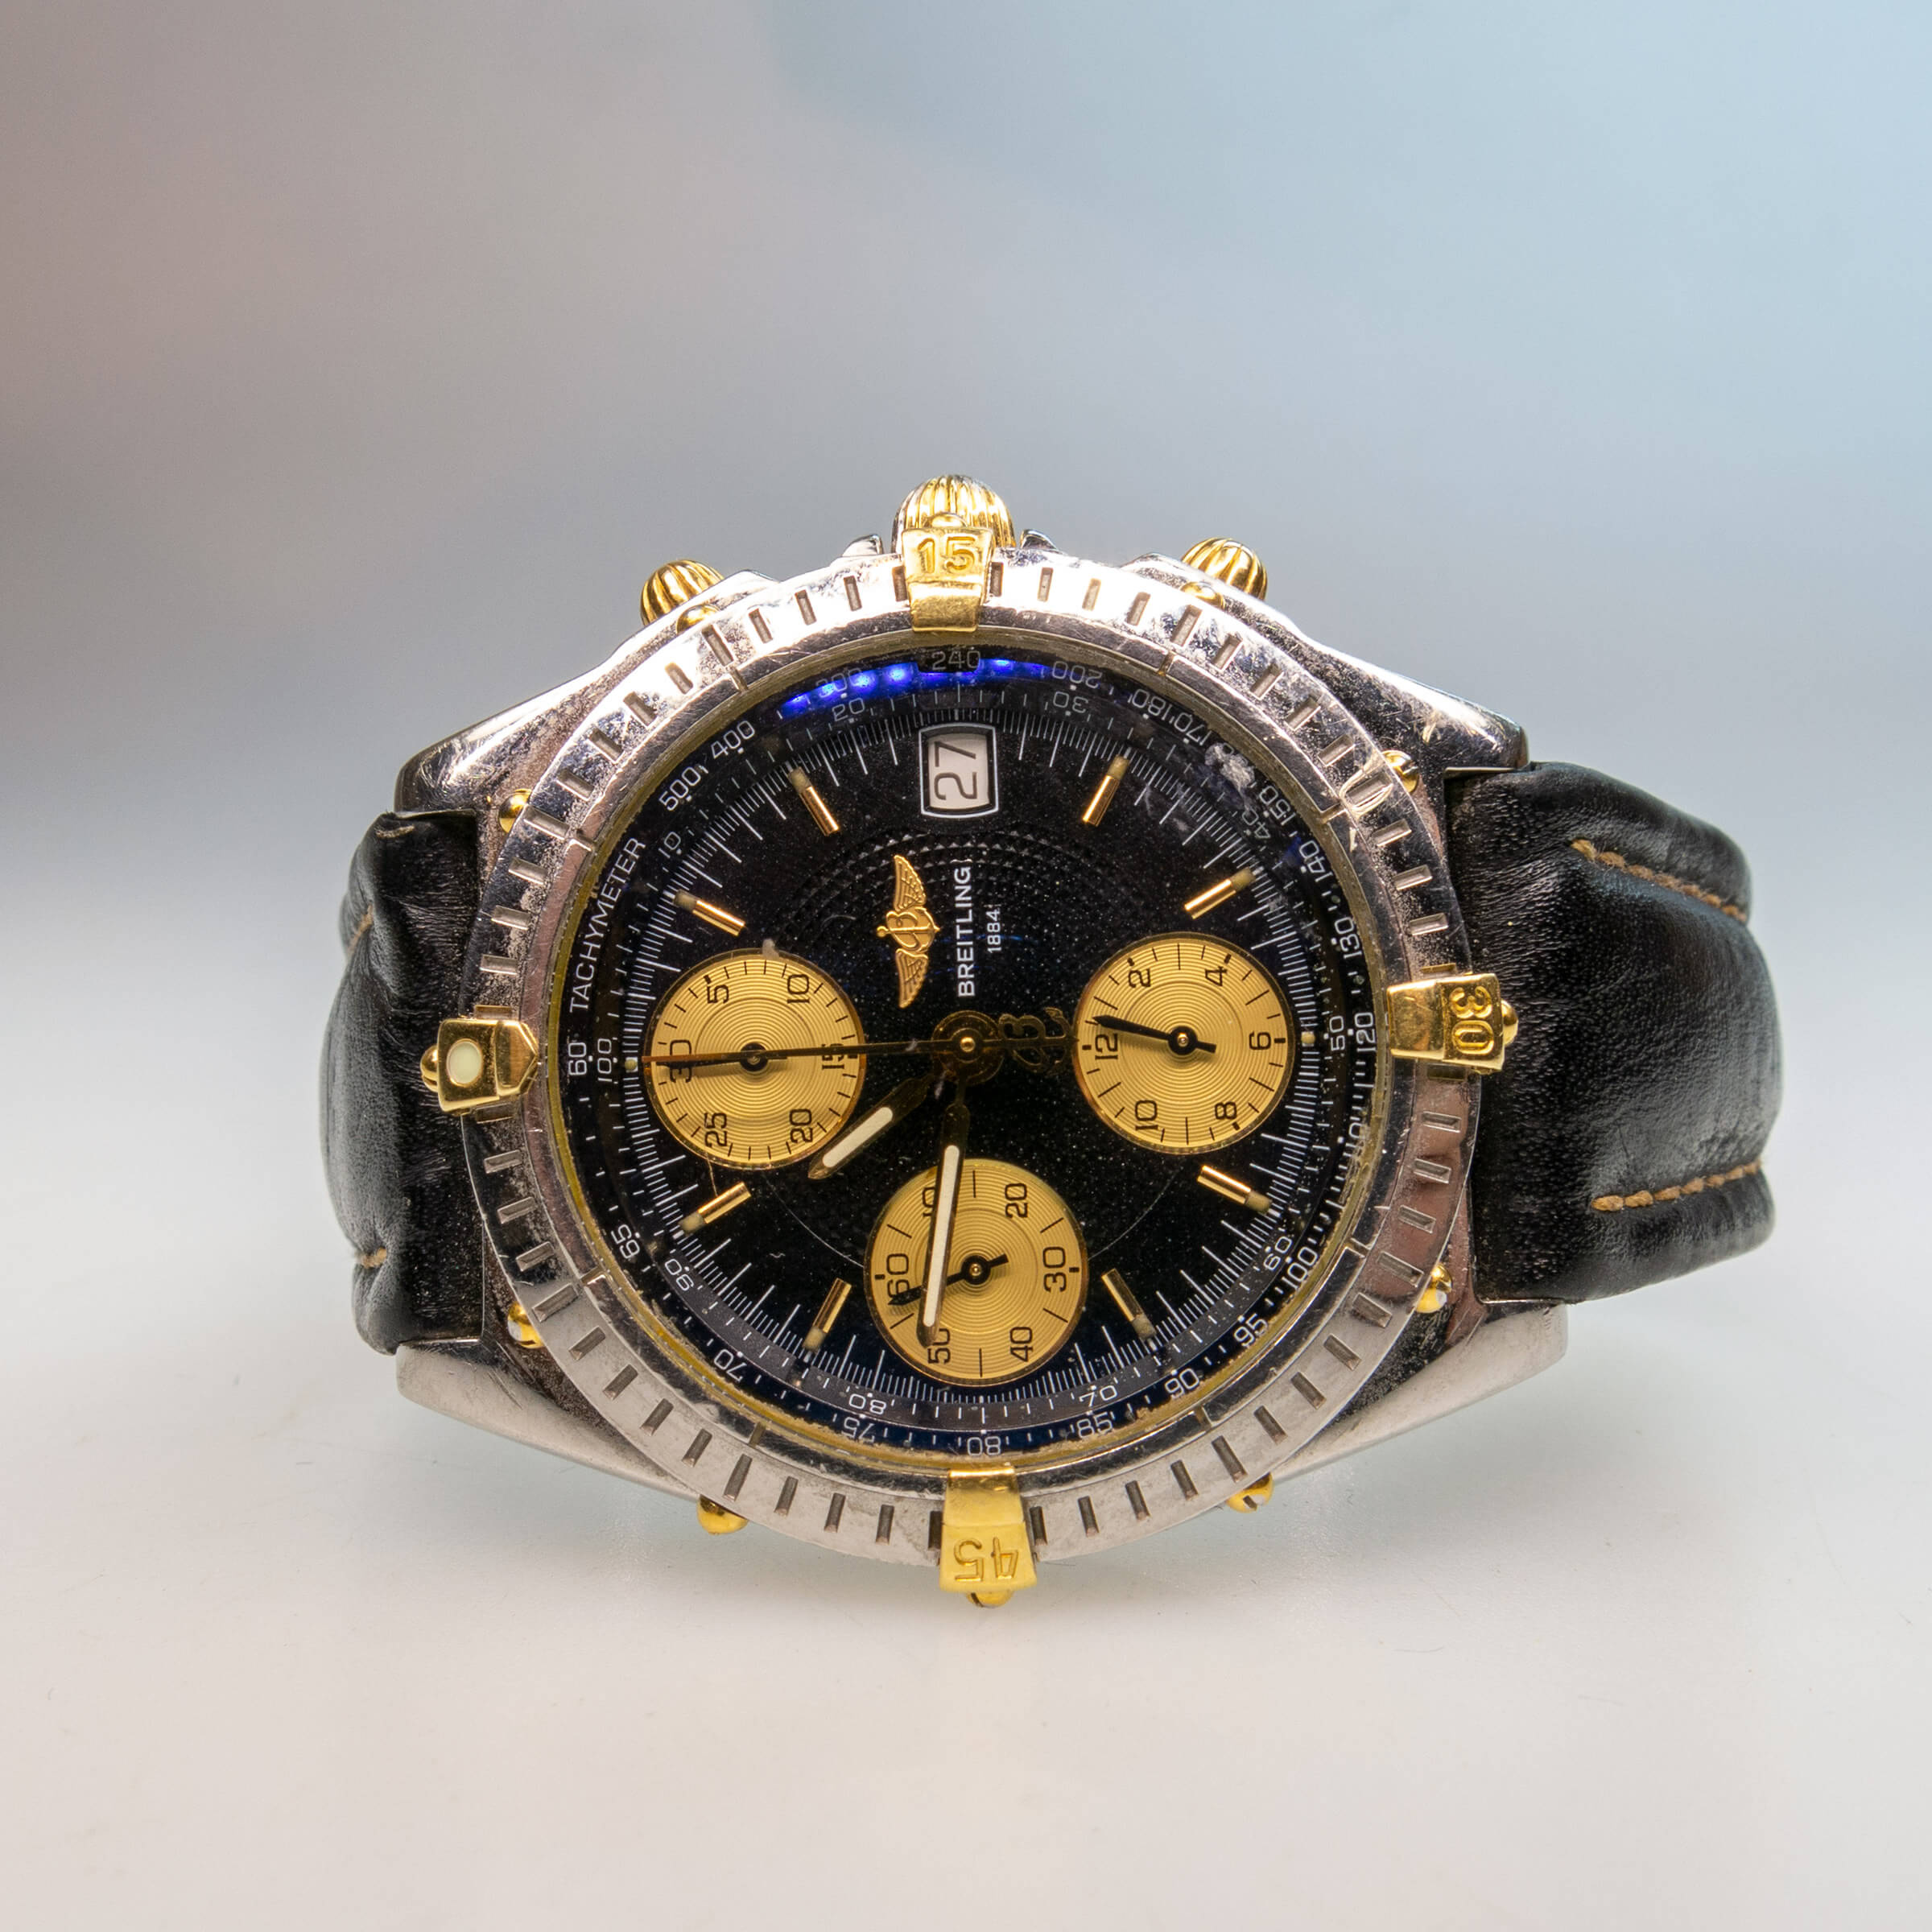 Breitling Wristwatch With Chronograph And Date